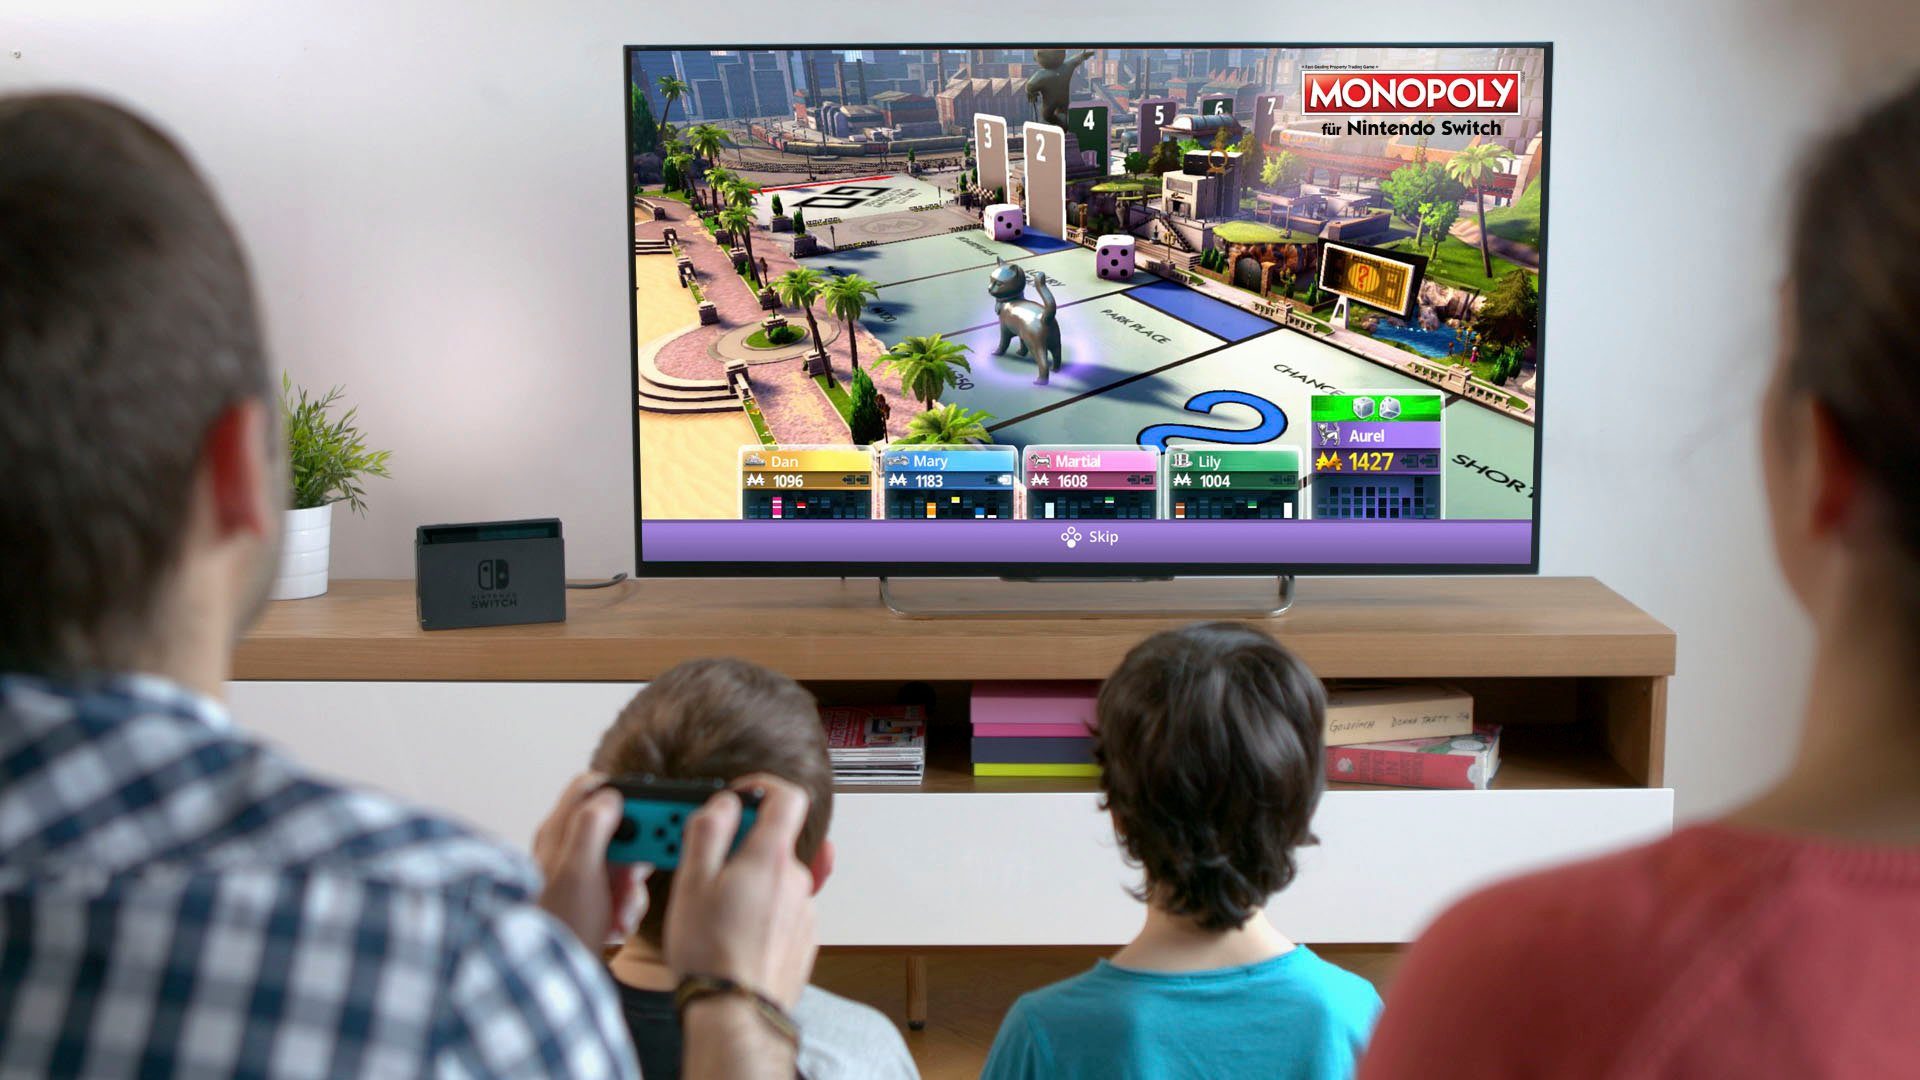 Switch (CODE UBISOFT MONOPOLY IN Nintendo BOX) THE